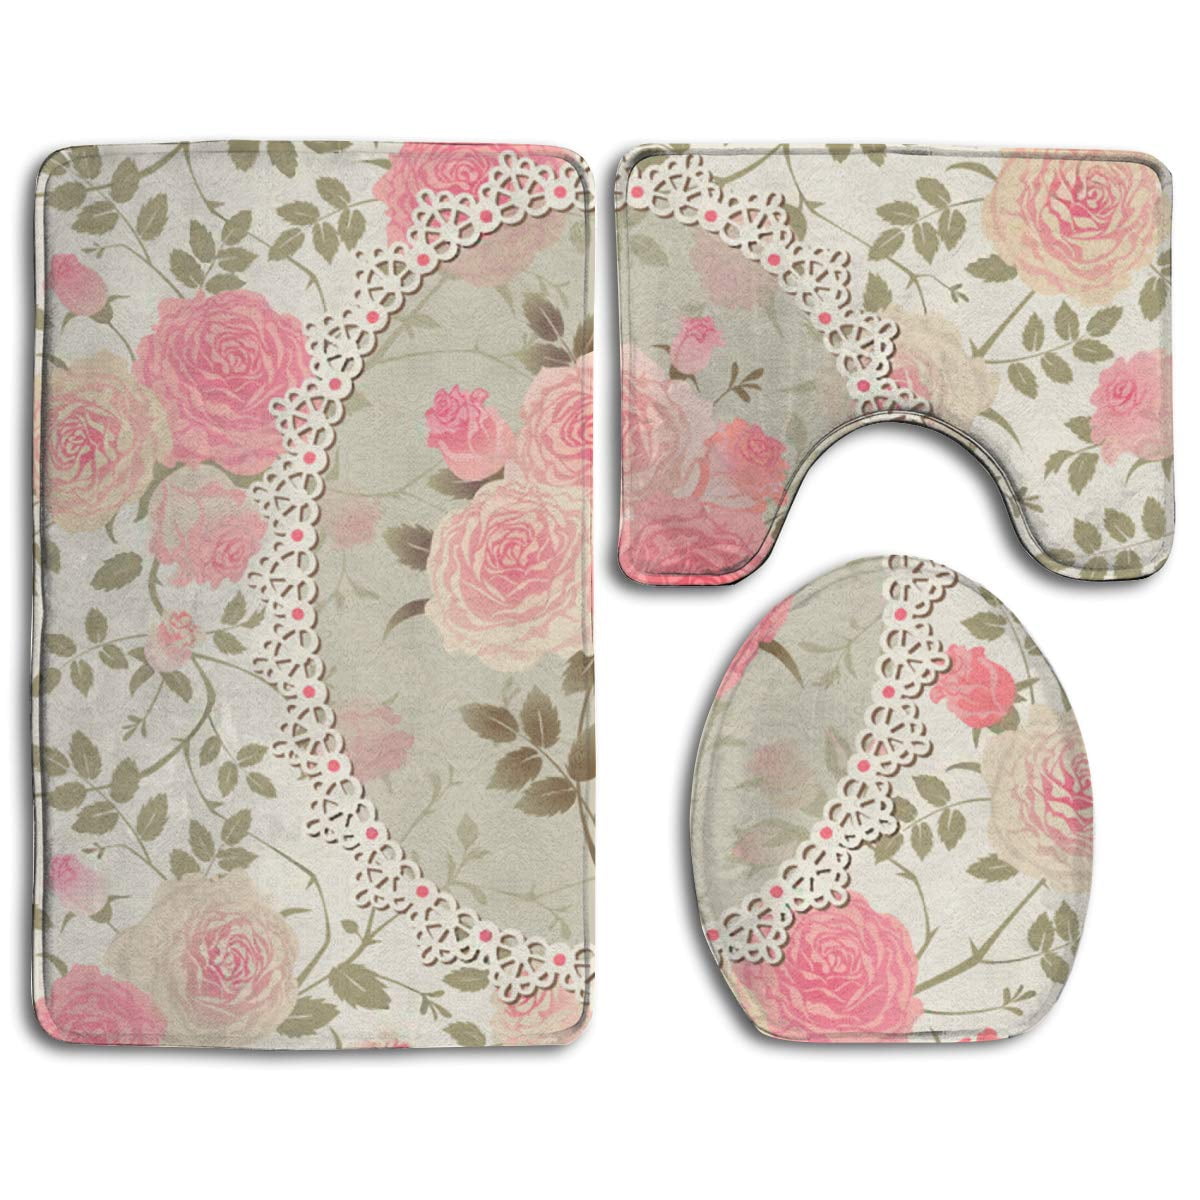 ZOE GARDEN 3 PCS Toilet Seat Bathroom Rugs Pink Rose Flowers Clusters Memory Foam Bath Rug Contour Mat Lid Cover Non-Slip with Rubber Backing Doormat 18x30+15x18+14x18